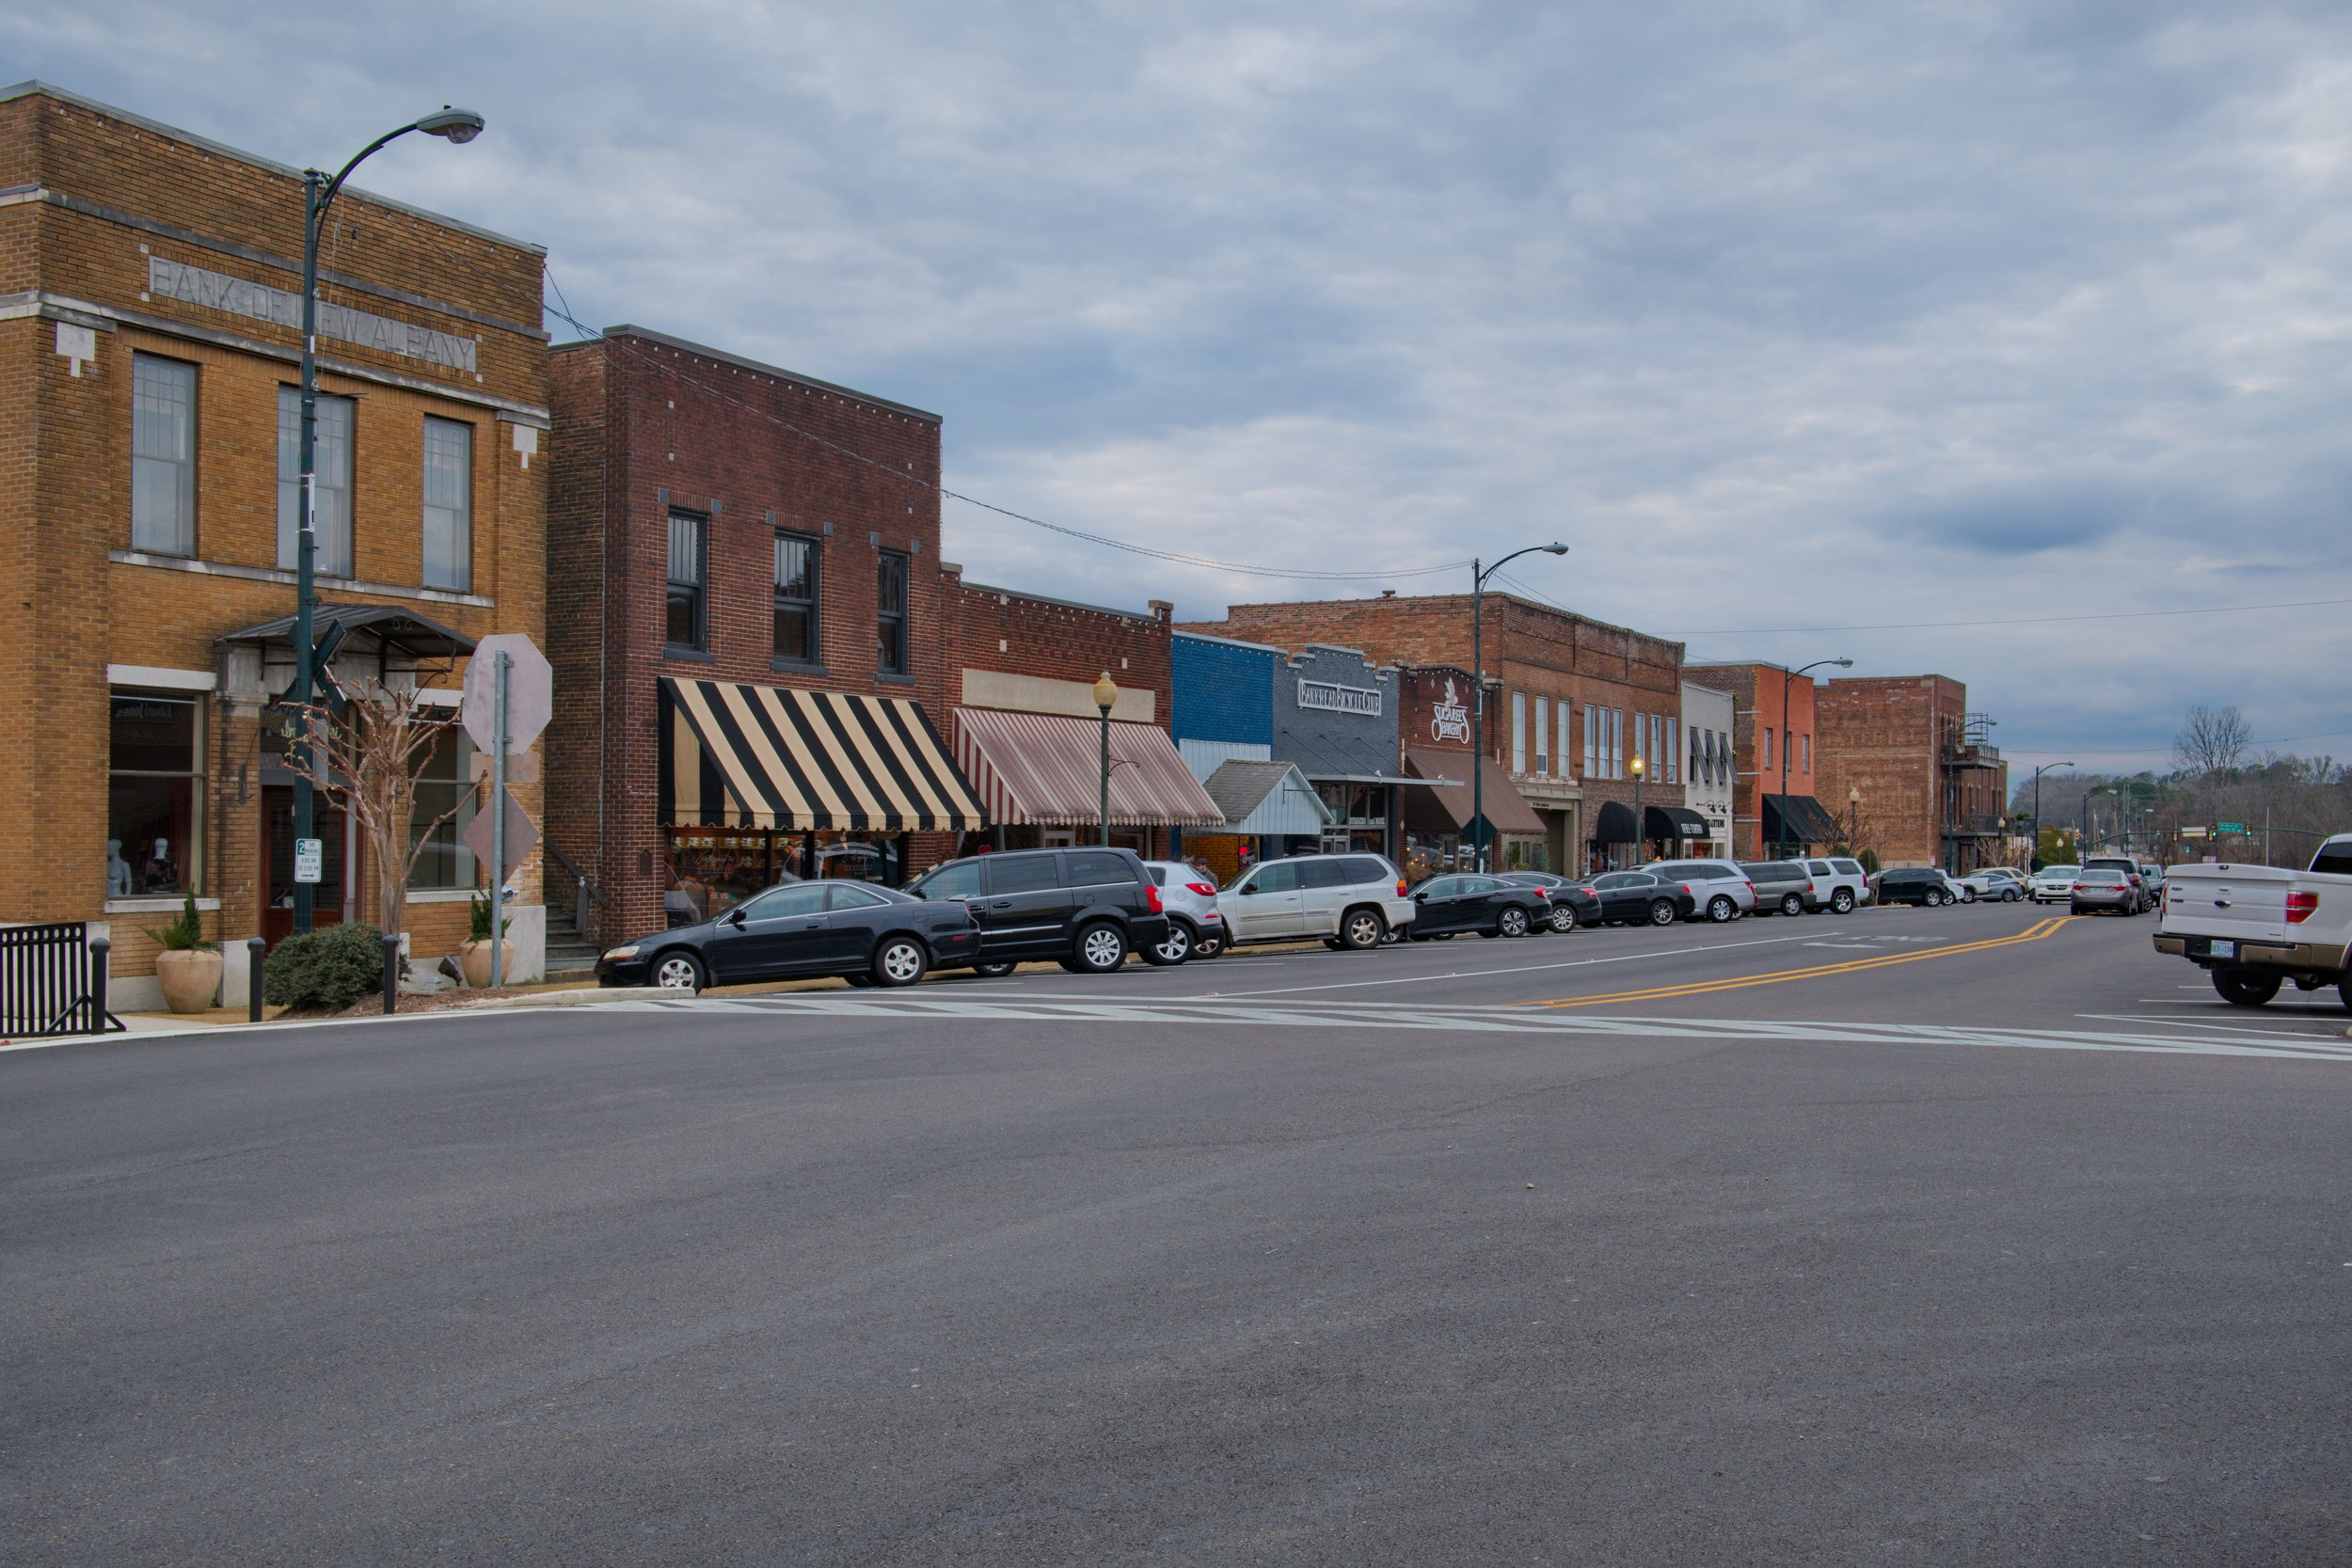  New Albany has really worked hard at making the downtown attractive - lots of nice places to shop and eat 